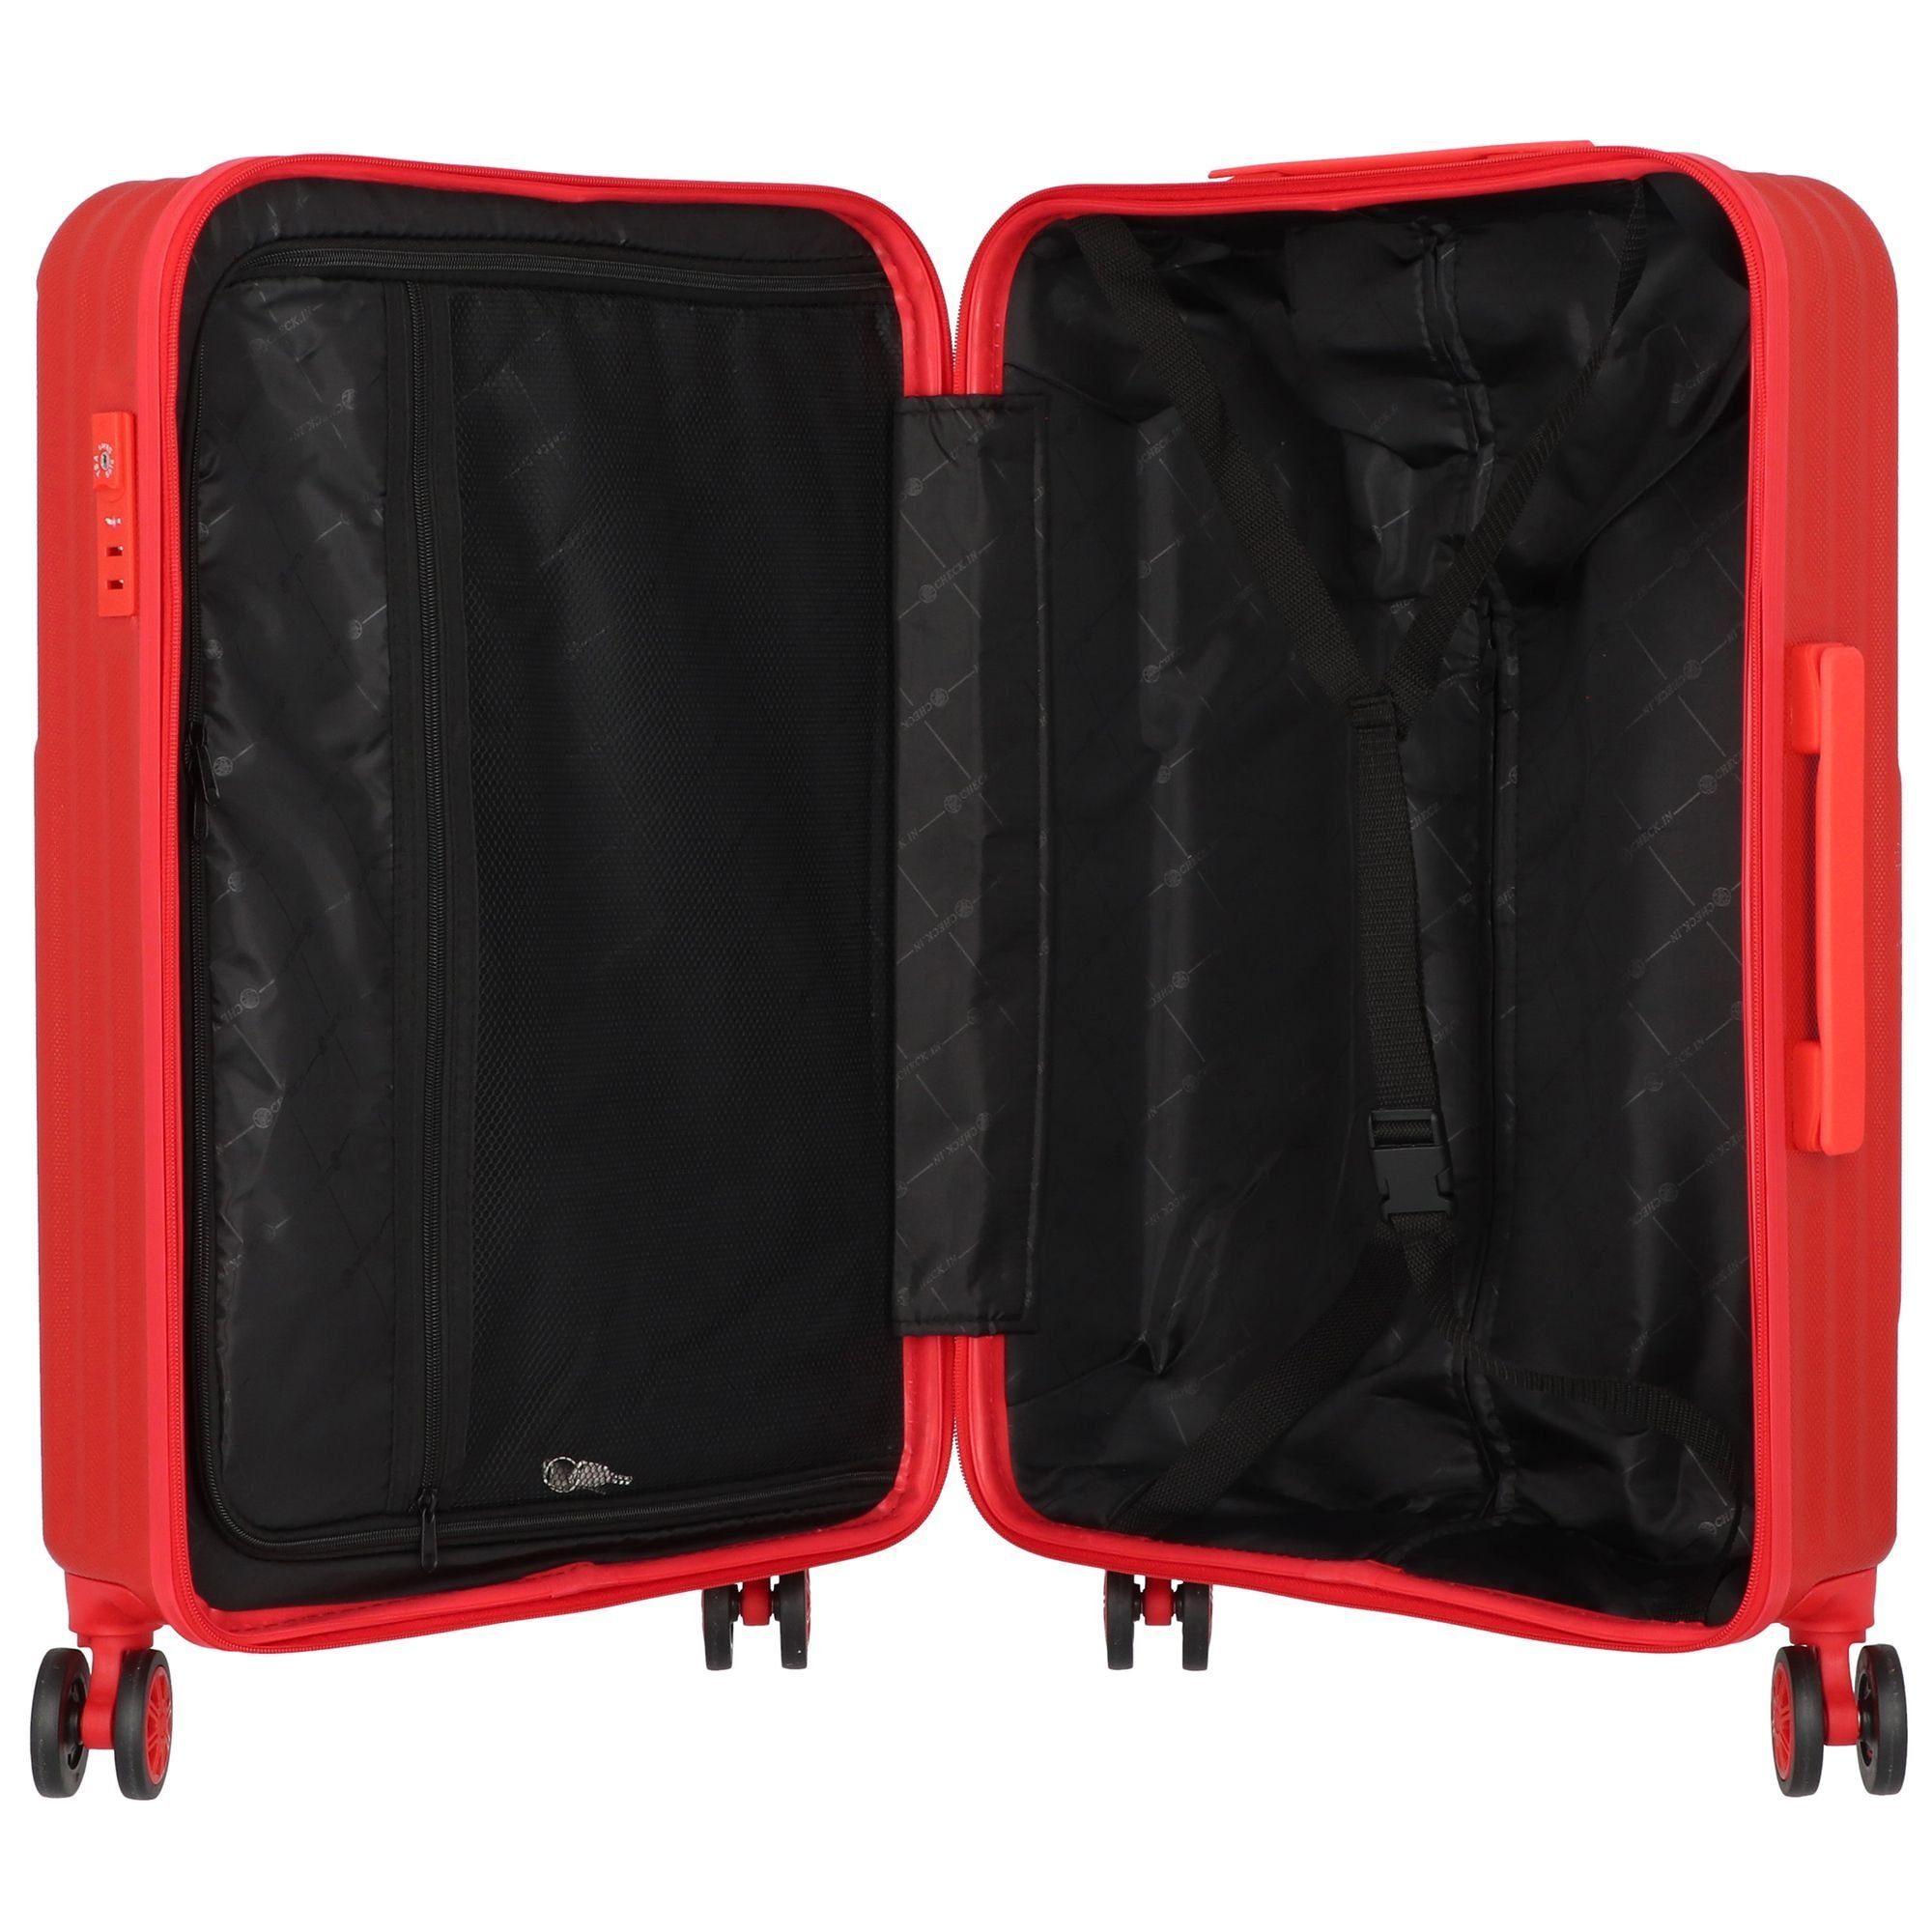 CHECK.IN® 4 Liverpool, rot (3-teilig, ABS tlg), Rollen, Trolleyset 3